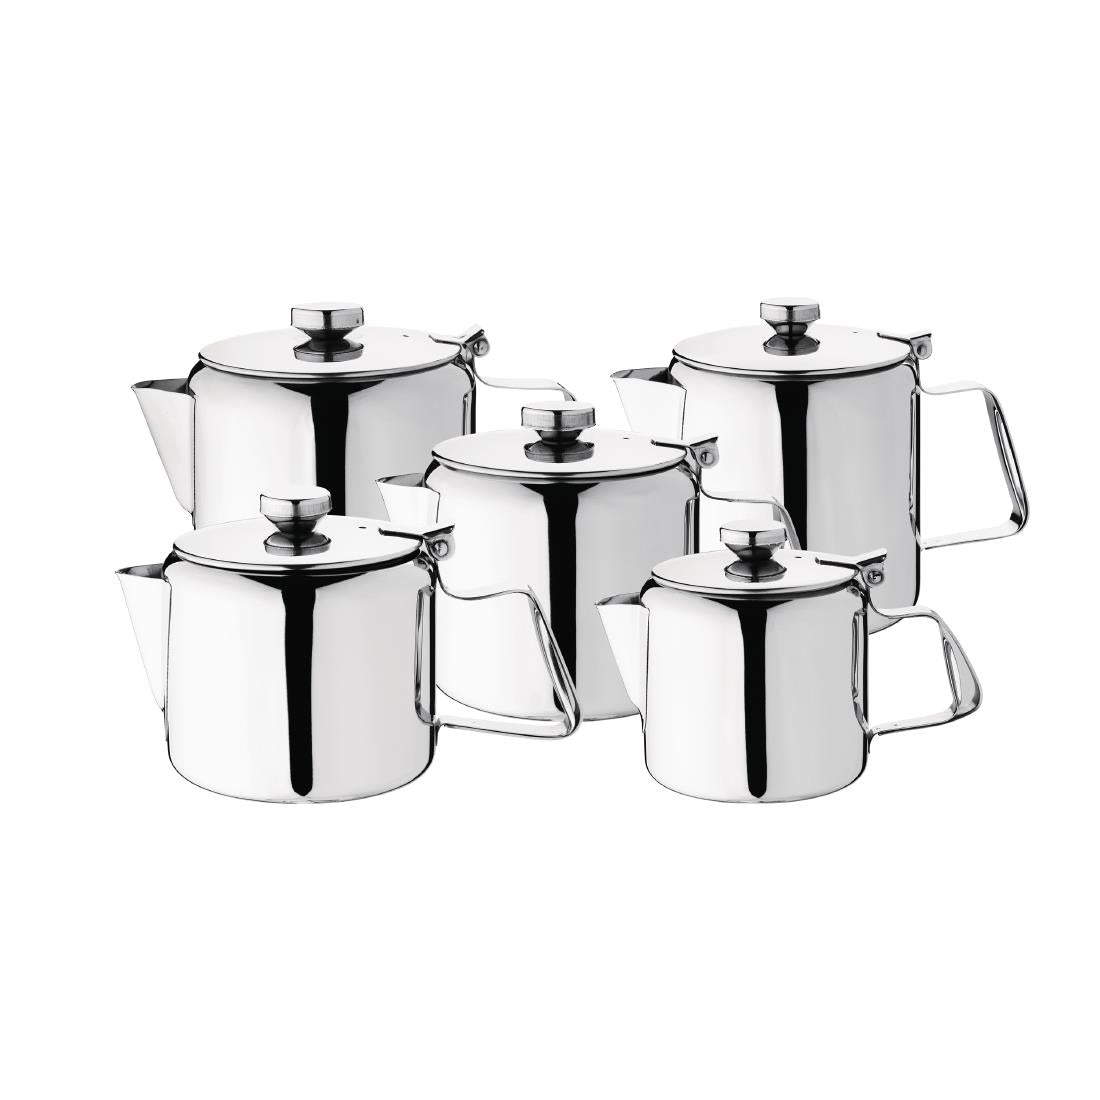 K679 Olympia Concorde Stainless Steel Teapot 850ml